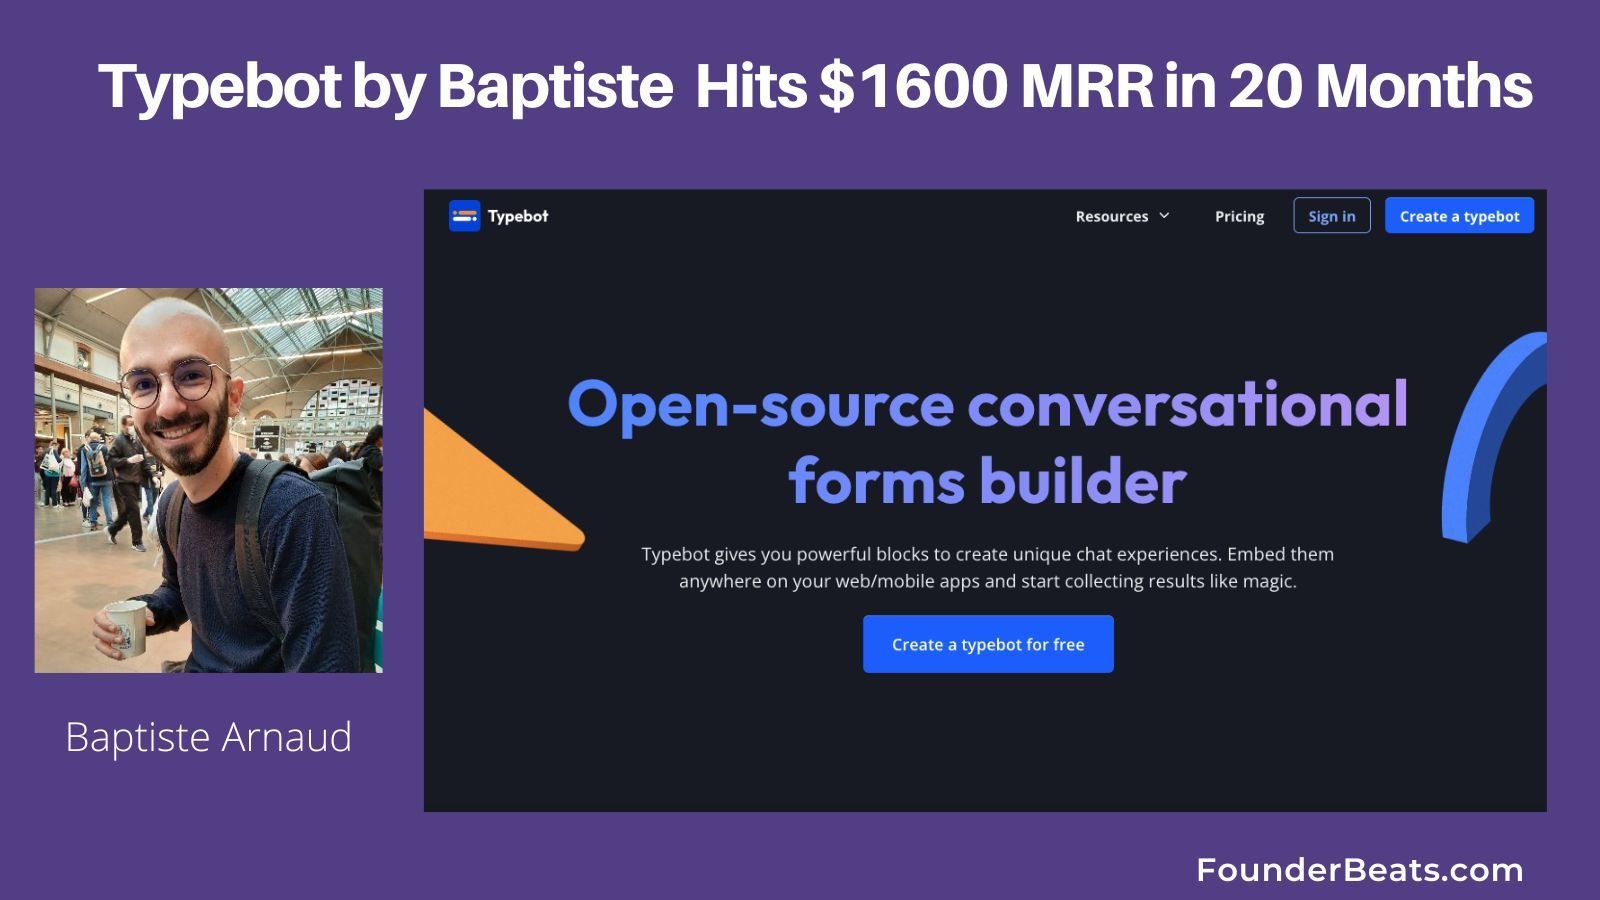 Typebot by Baptiste Arnaud Hits $1600 MRR in 20 Months  